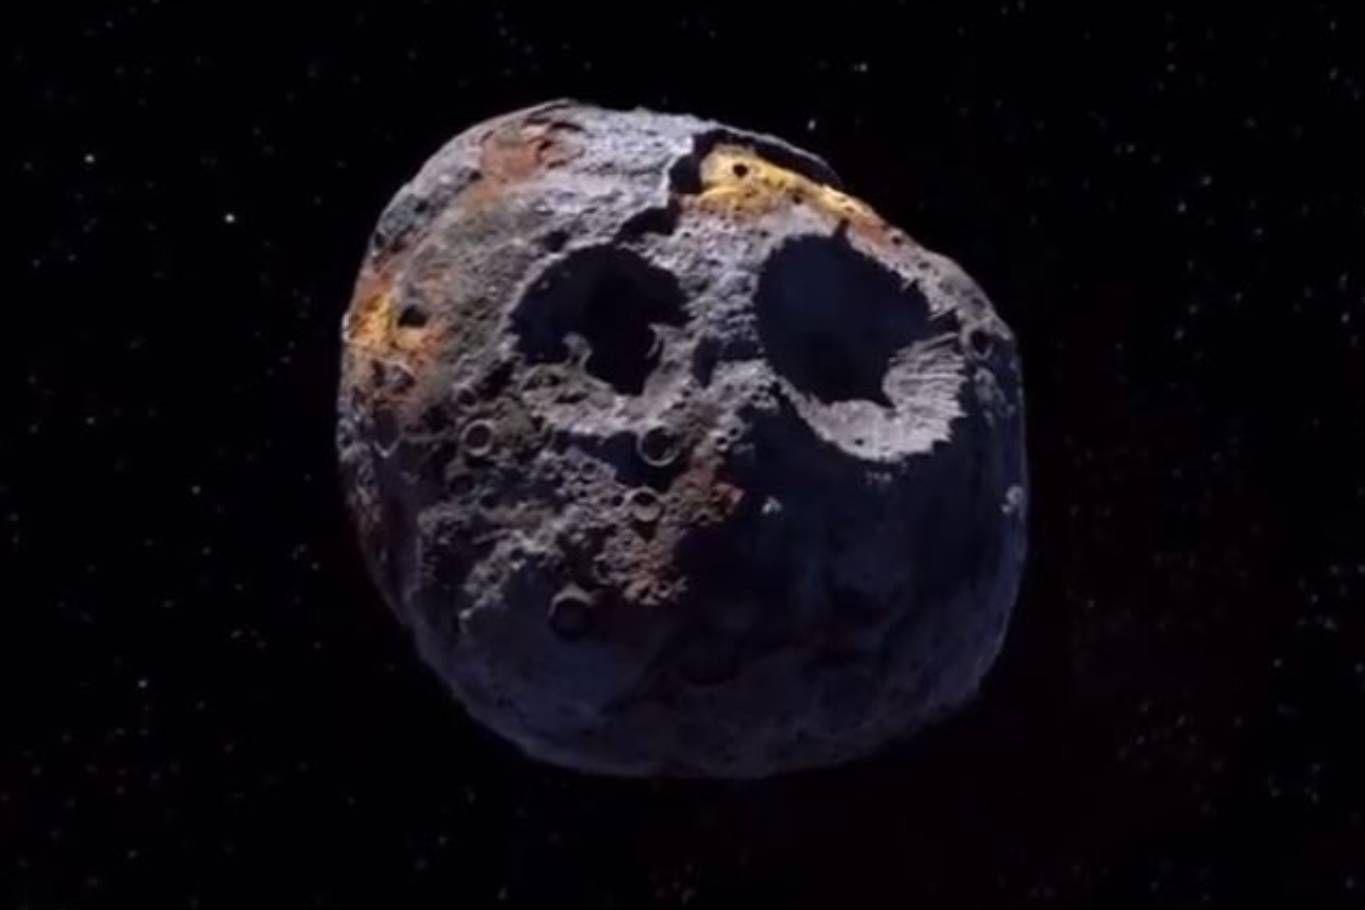 Make sure the asteroid Psycho is more valuable than the Earth’s overall economy